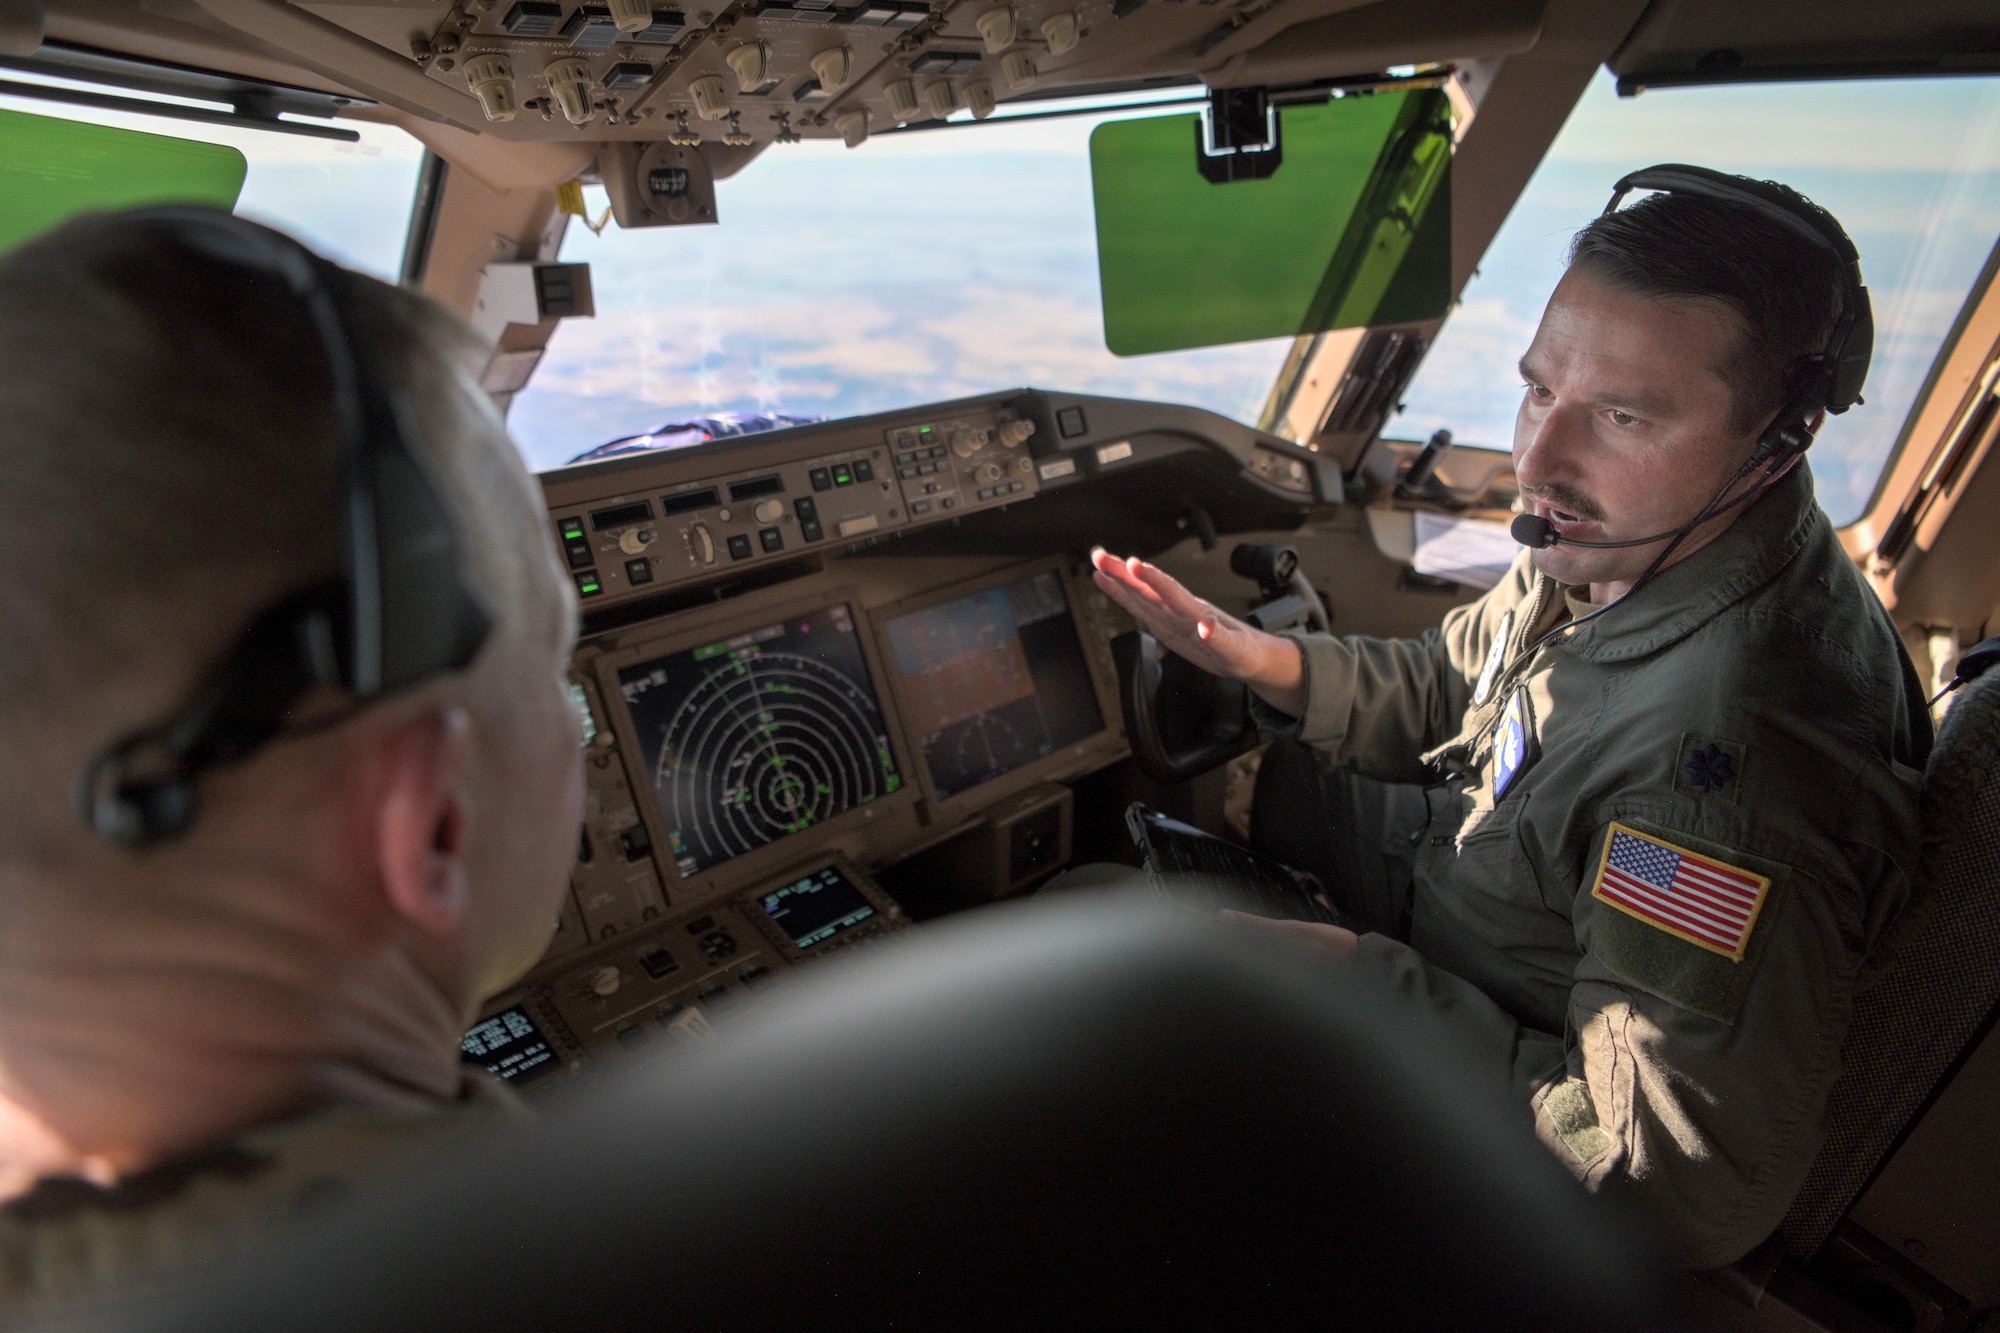 Lt. Col. Fisher speaks to Brig. Gen. Salmi in the pilot seats of a KC-46A Pegasus aircraft.